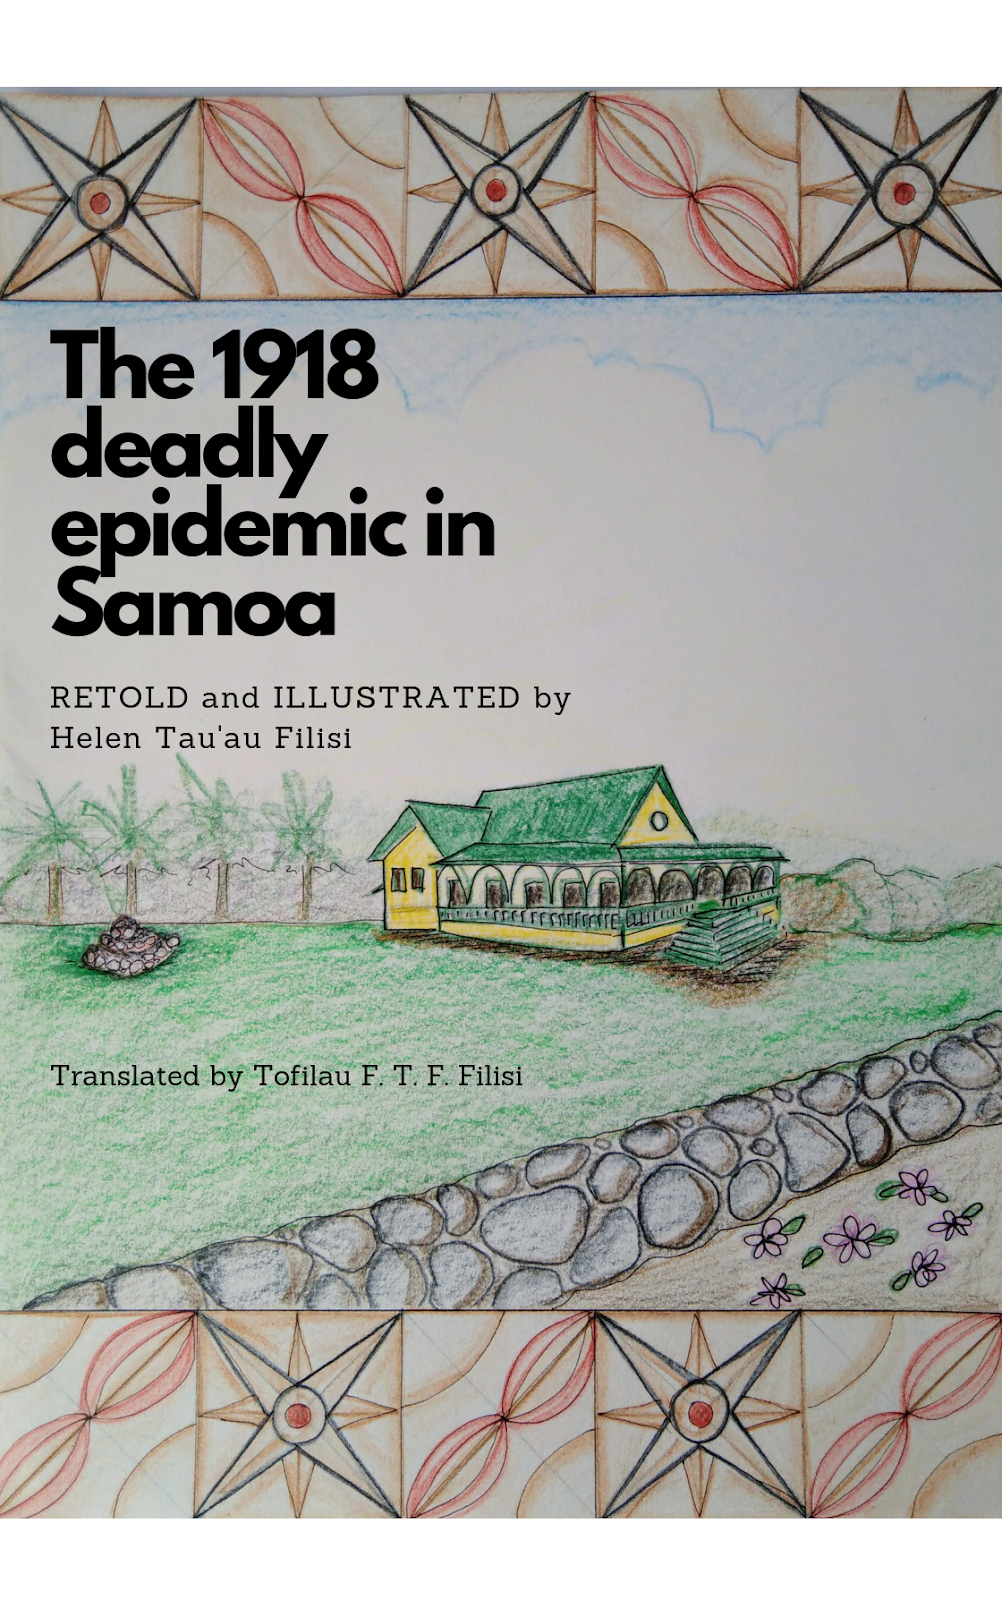 The 1918 deadly epidemic in Samoa